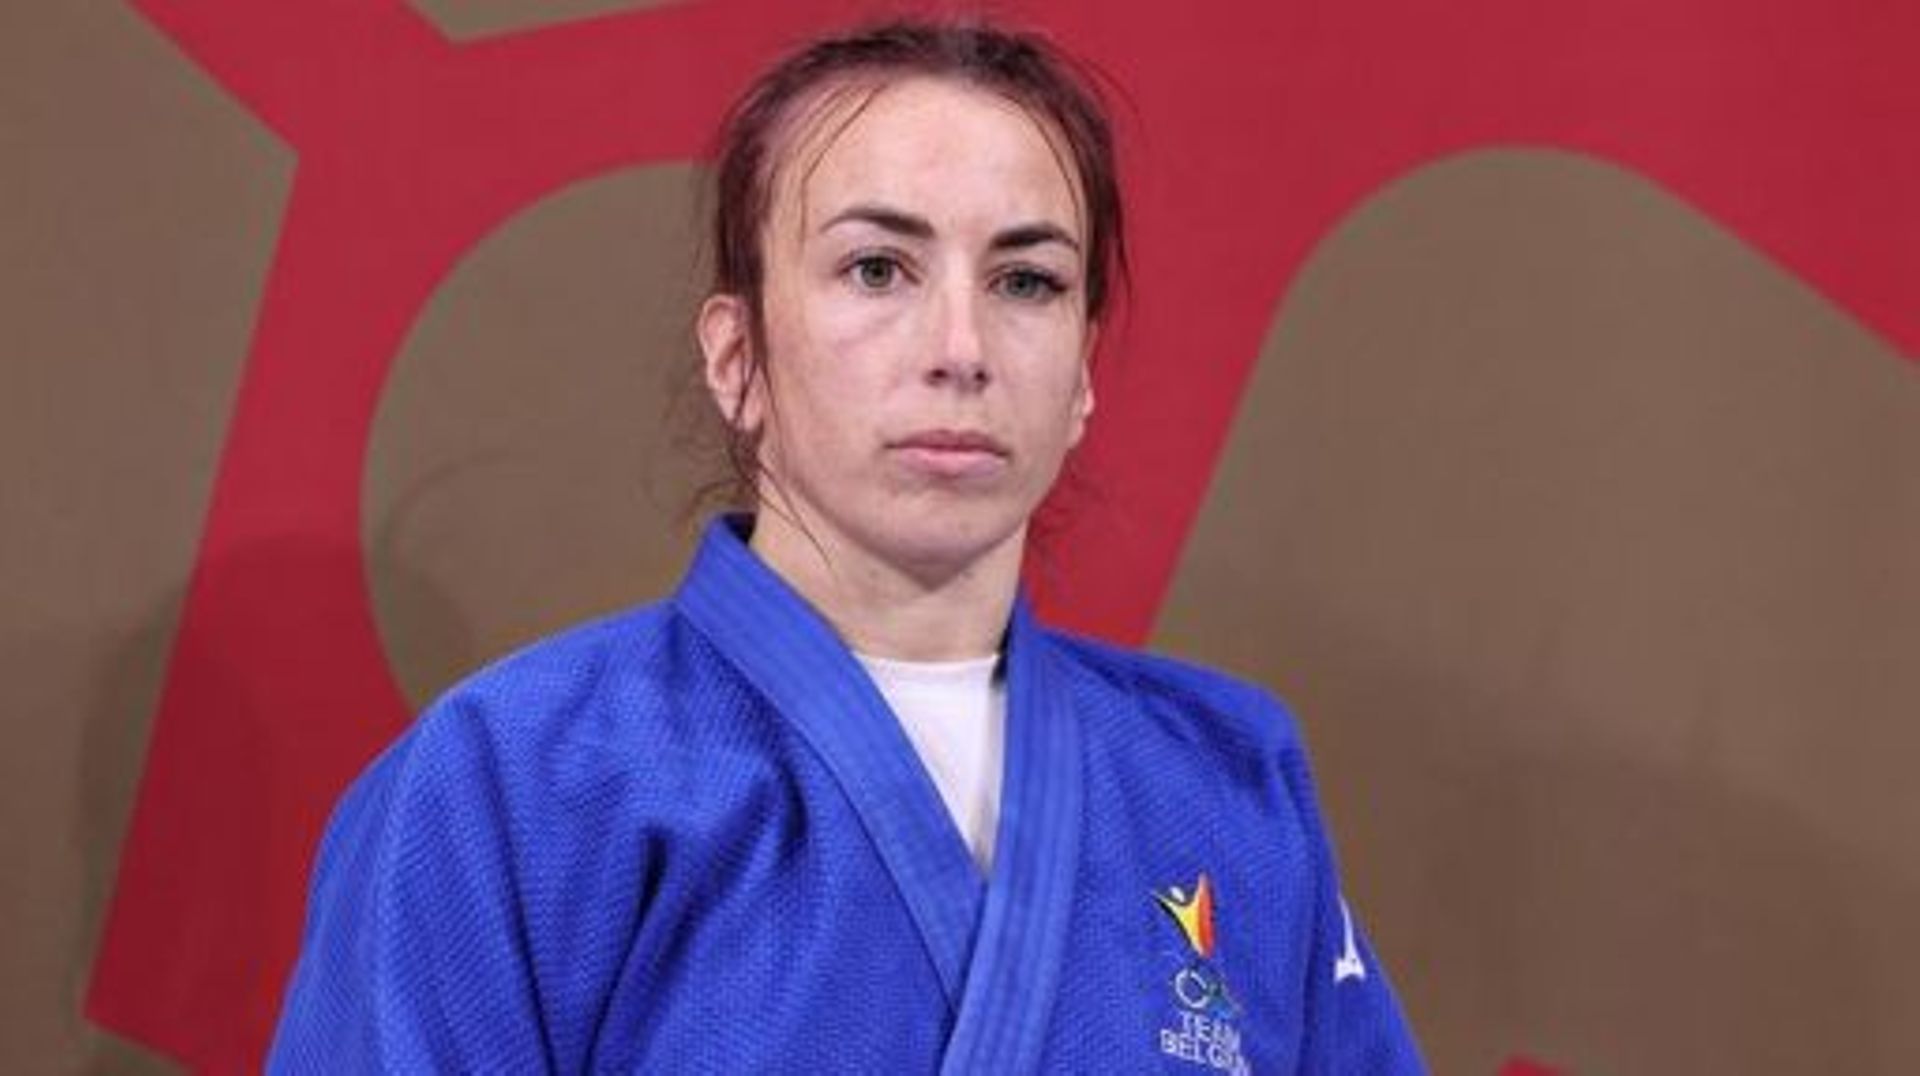 Belgian Judoka Charline Van Snick pictured ahead of the first round match in the women's -52kg judo competition, on the third day of the 'Tokyo 2020 Olympic Games' in Tokyo, Japan on Sunday 25 July 2021. The postponed 2020 Summer Olympics are taking place